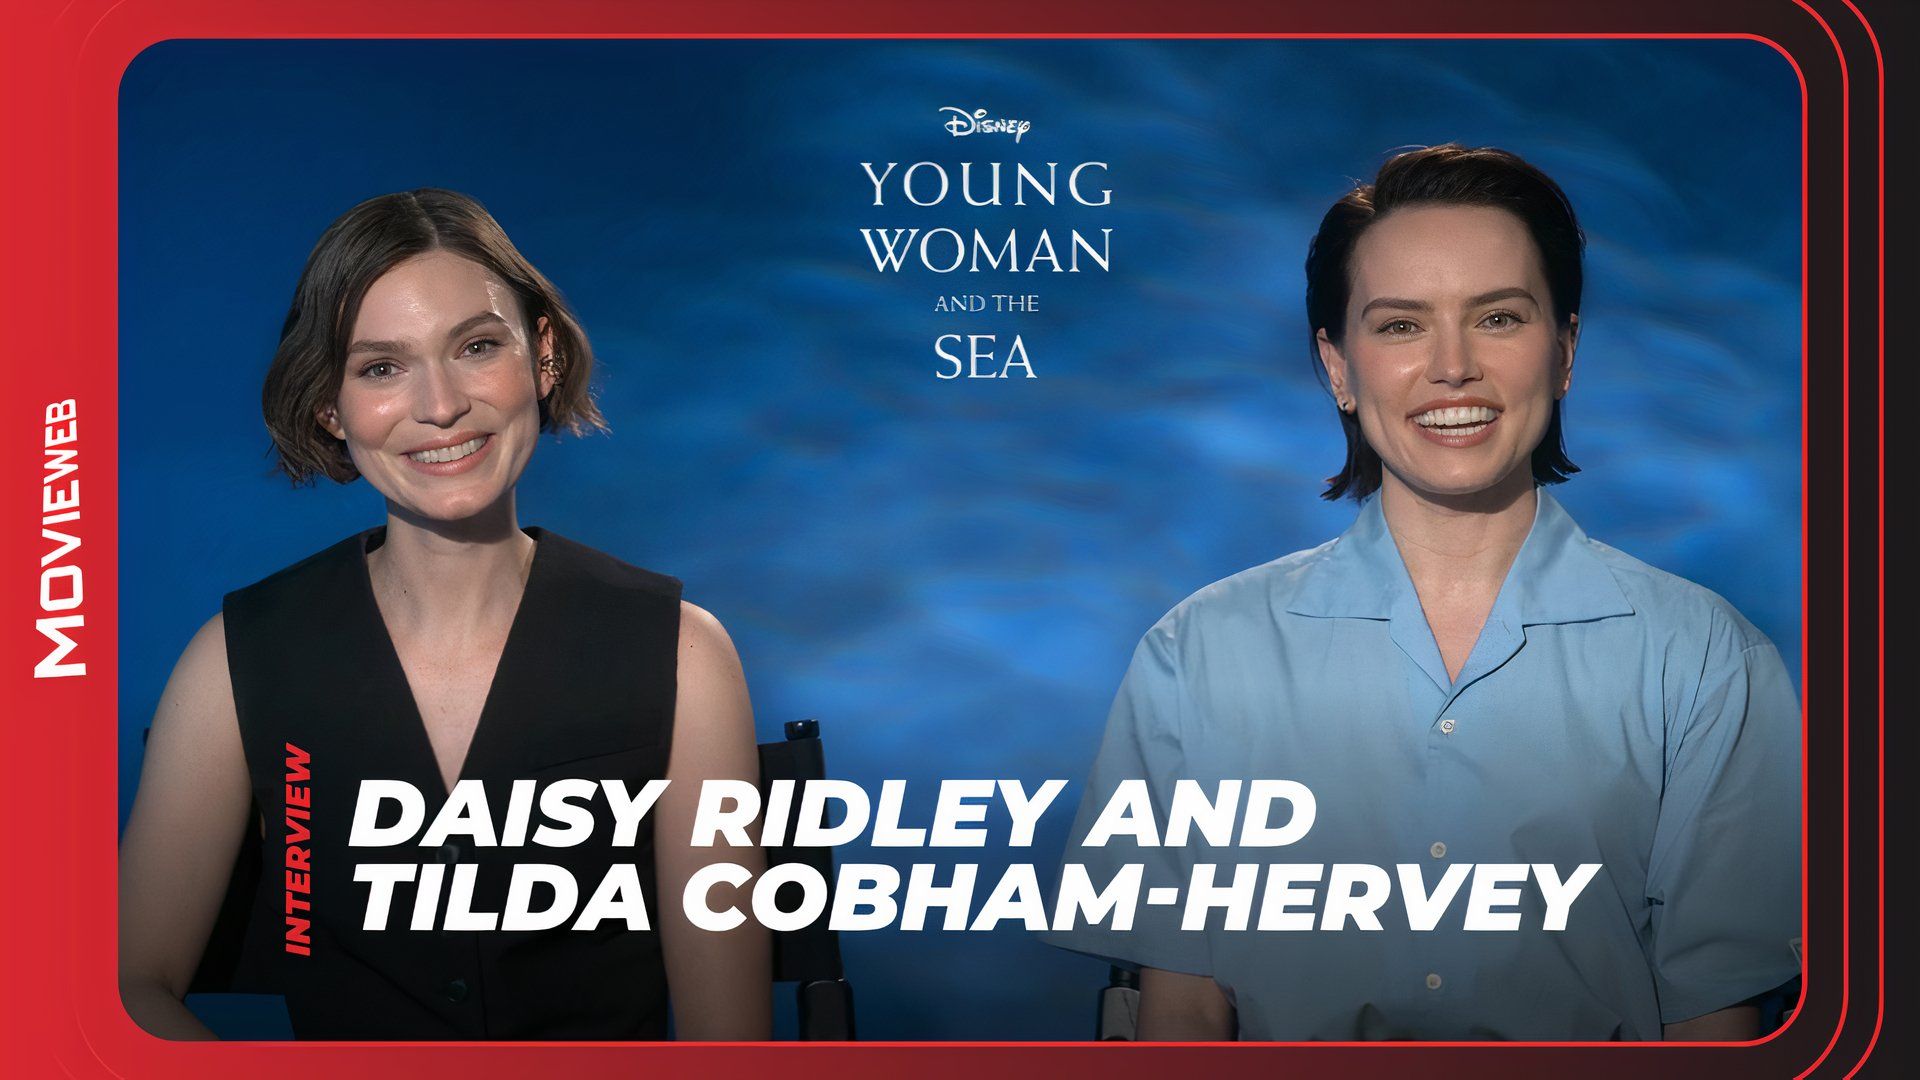 Young Woman and the Sea - Daisy Ridley and Tilda Cobham-Hervey Interview